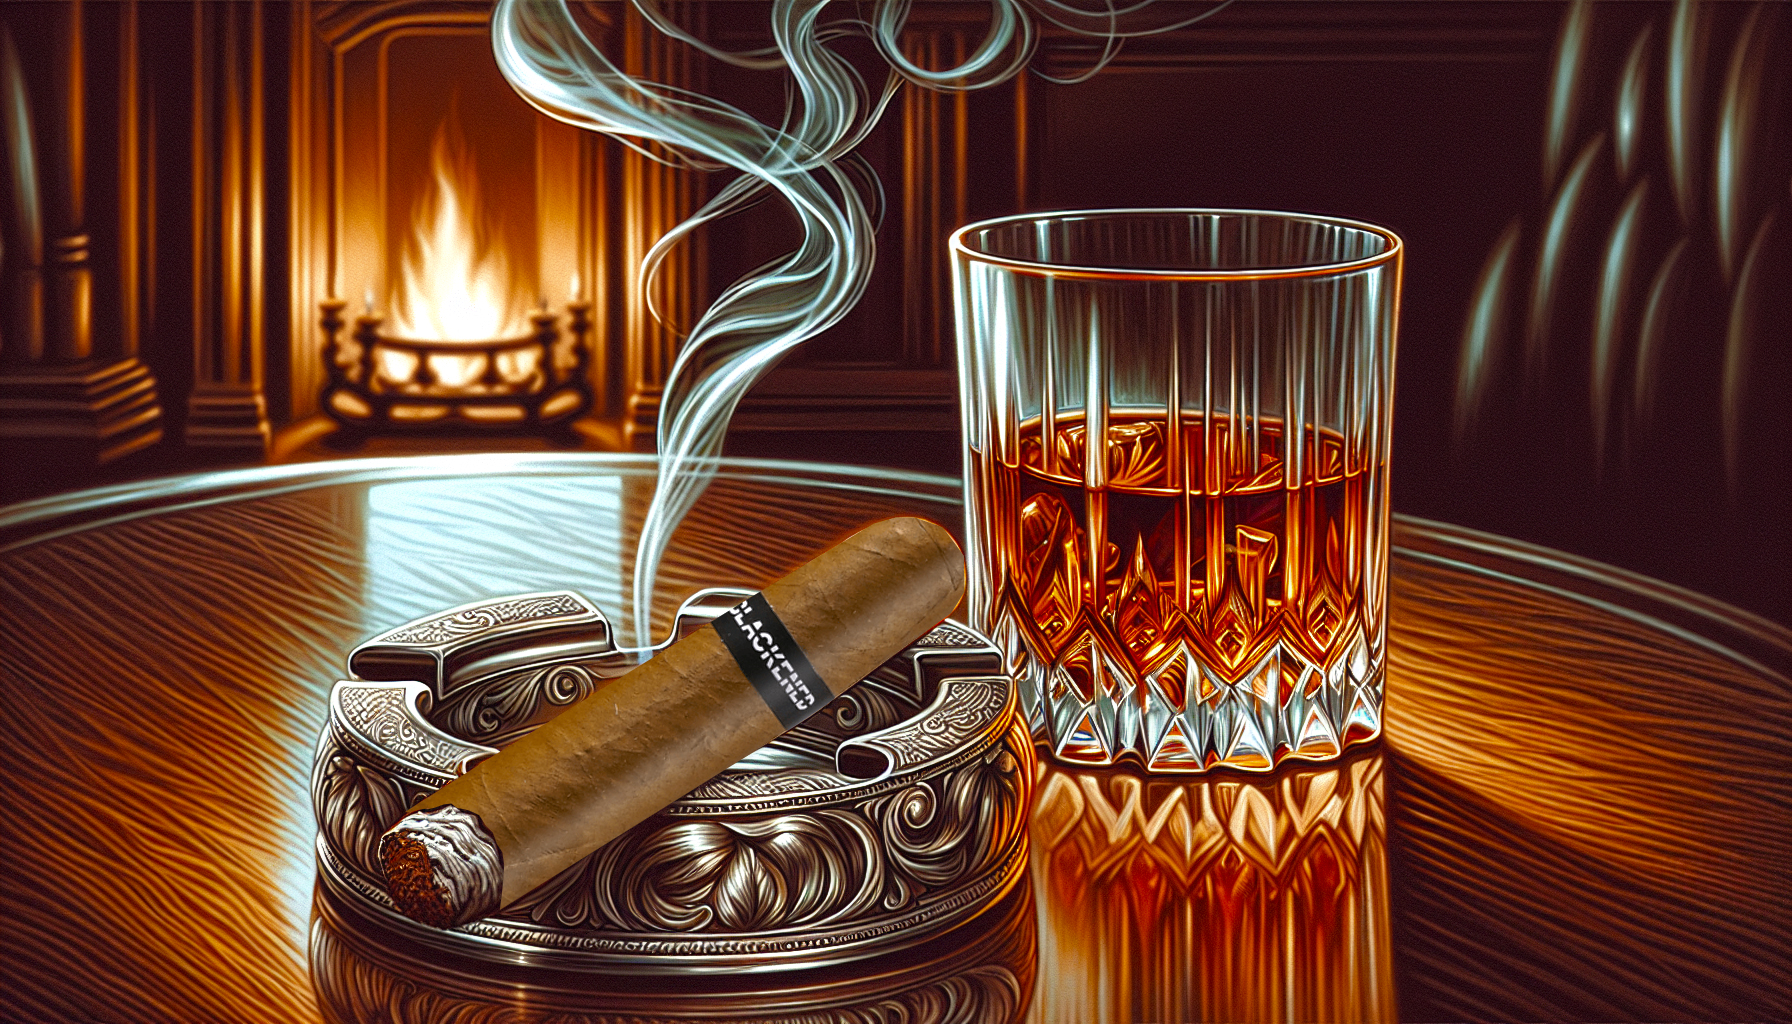 Illustration of a smooth cigar and whiskey